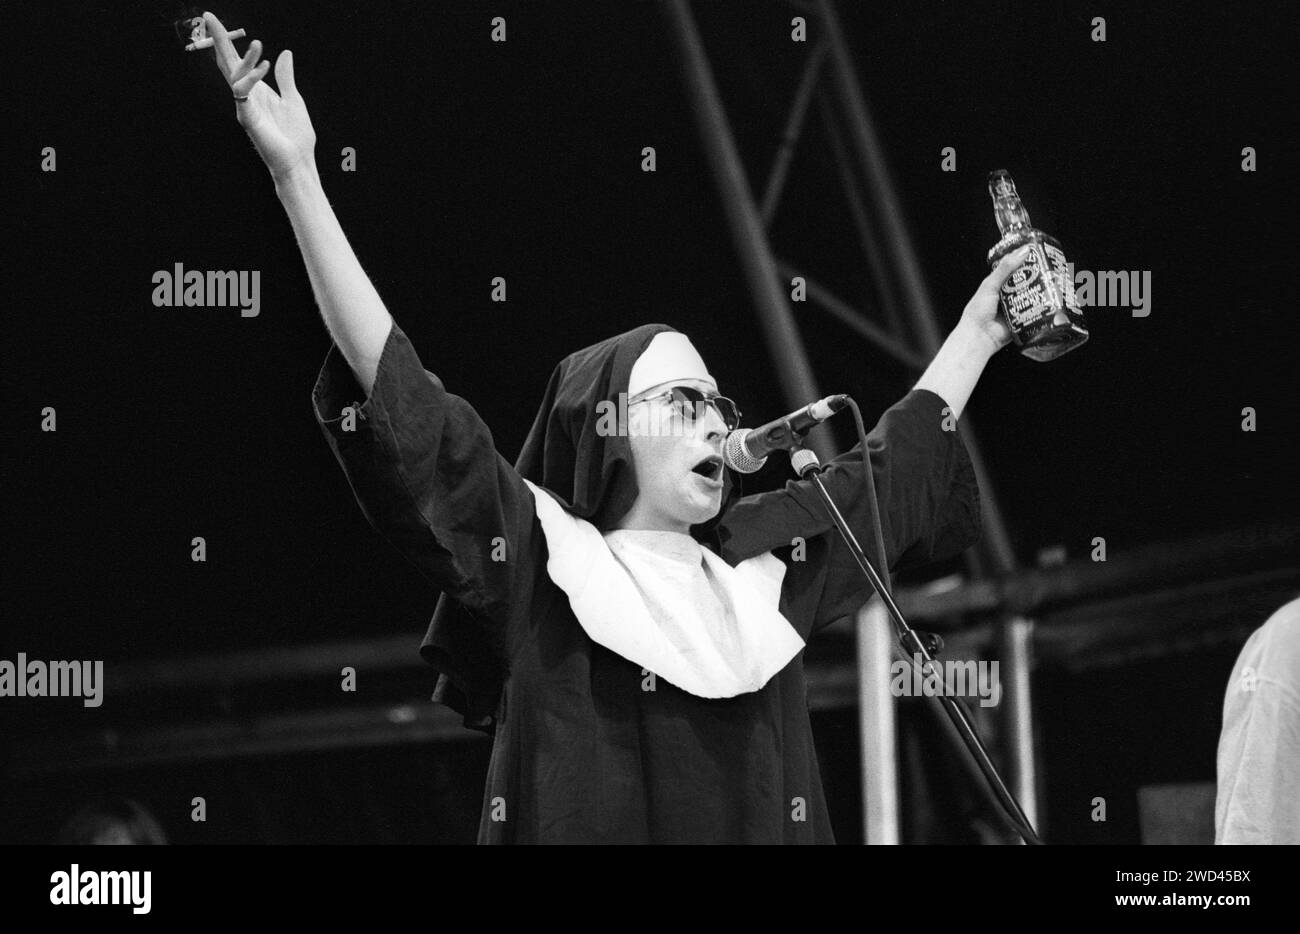 CHUMBAWAMBA, CARDIFF BIG WEEKEND, 1994: Alice Nutter of Chumbawamba playing at Cardiff Big Weekend on 12 August 1994. Photo: Rob Watkins. INFO: Chumbawamba, a British alternative band formed in the '80s, evolved from anarcho-punk to embrace diverse styles. Best known for the hit 'Tubthumping,' their politically charged lyrics and genre-fluid approach made them a distinct and influential force in alternative music. Stock Photo